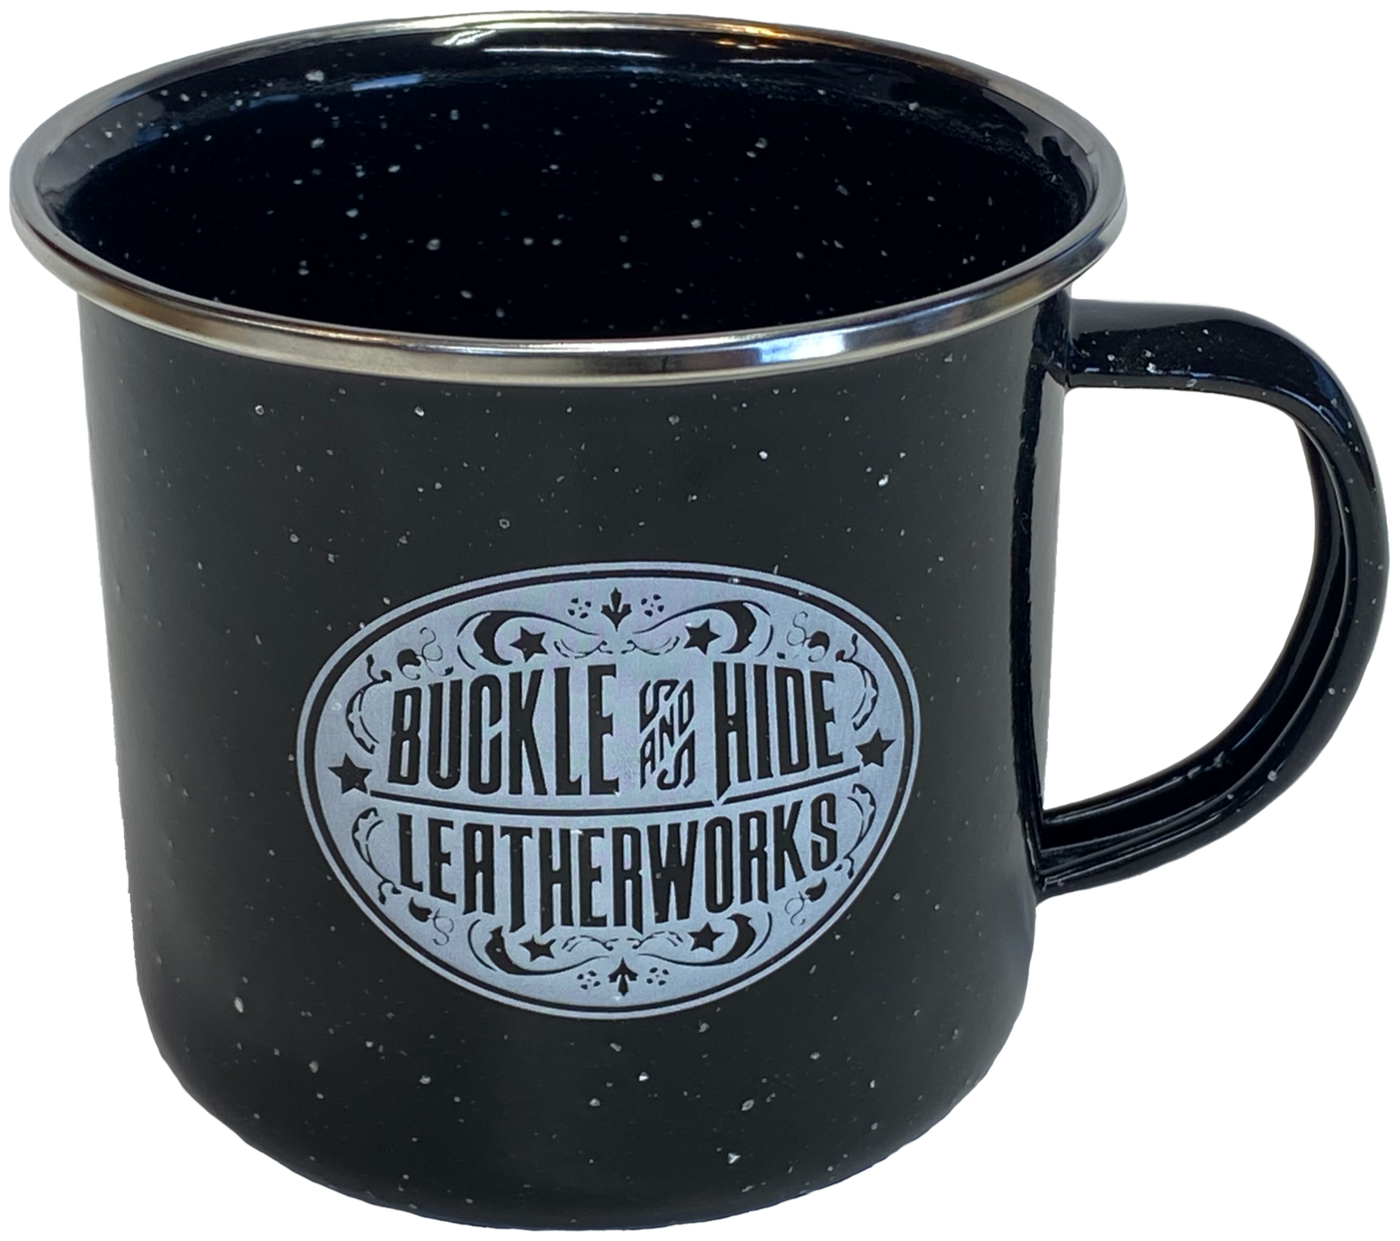 Enjoy for favorite coffee brew in this camping outdoorsy style cup. Our campfire mug is has a speckled look that lends a rustic appeal that's so a part of our Buckle and Hide Shop. 